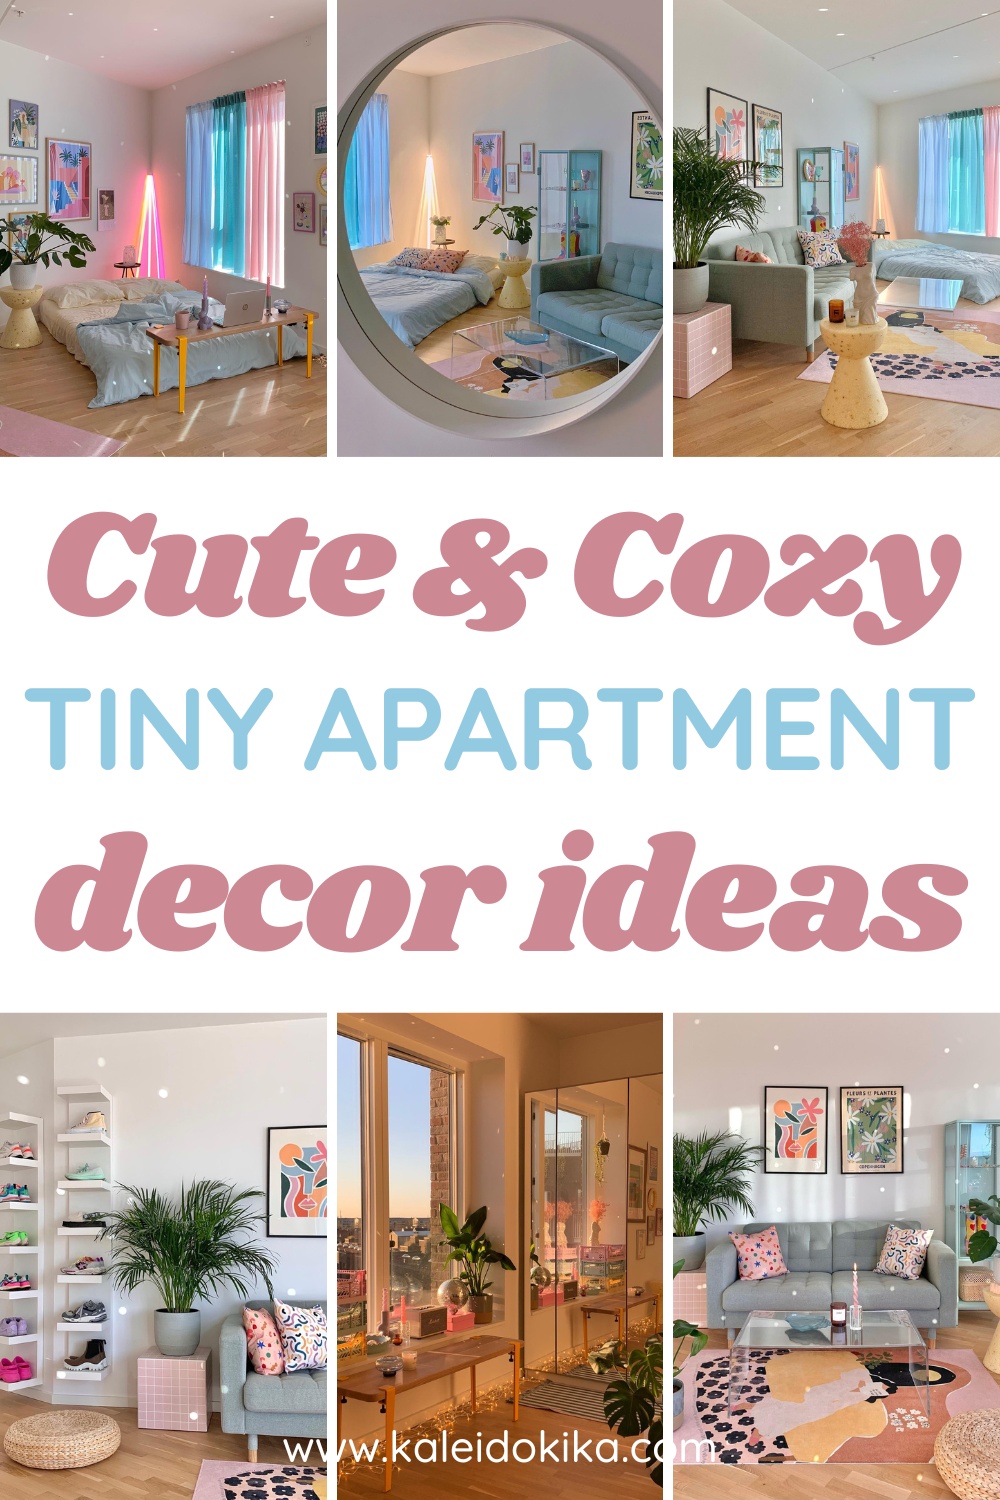 Thumbnail for a blog post showing cozy and cute apartment decor ideas